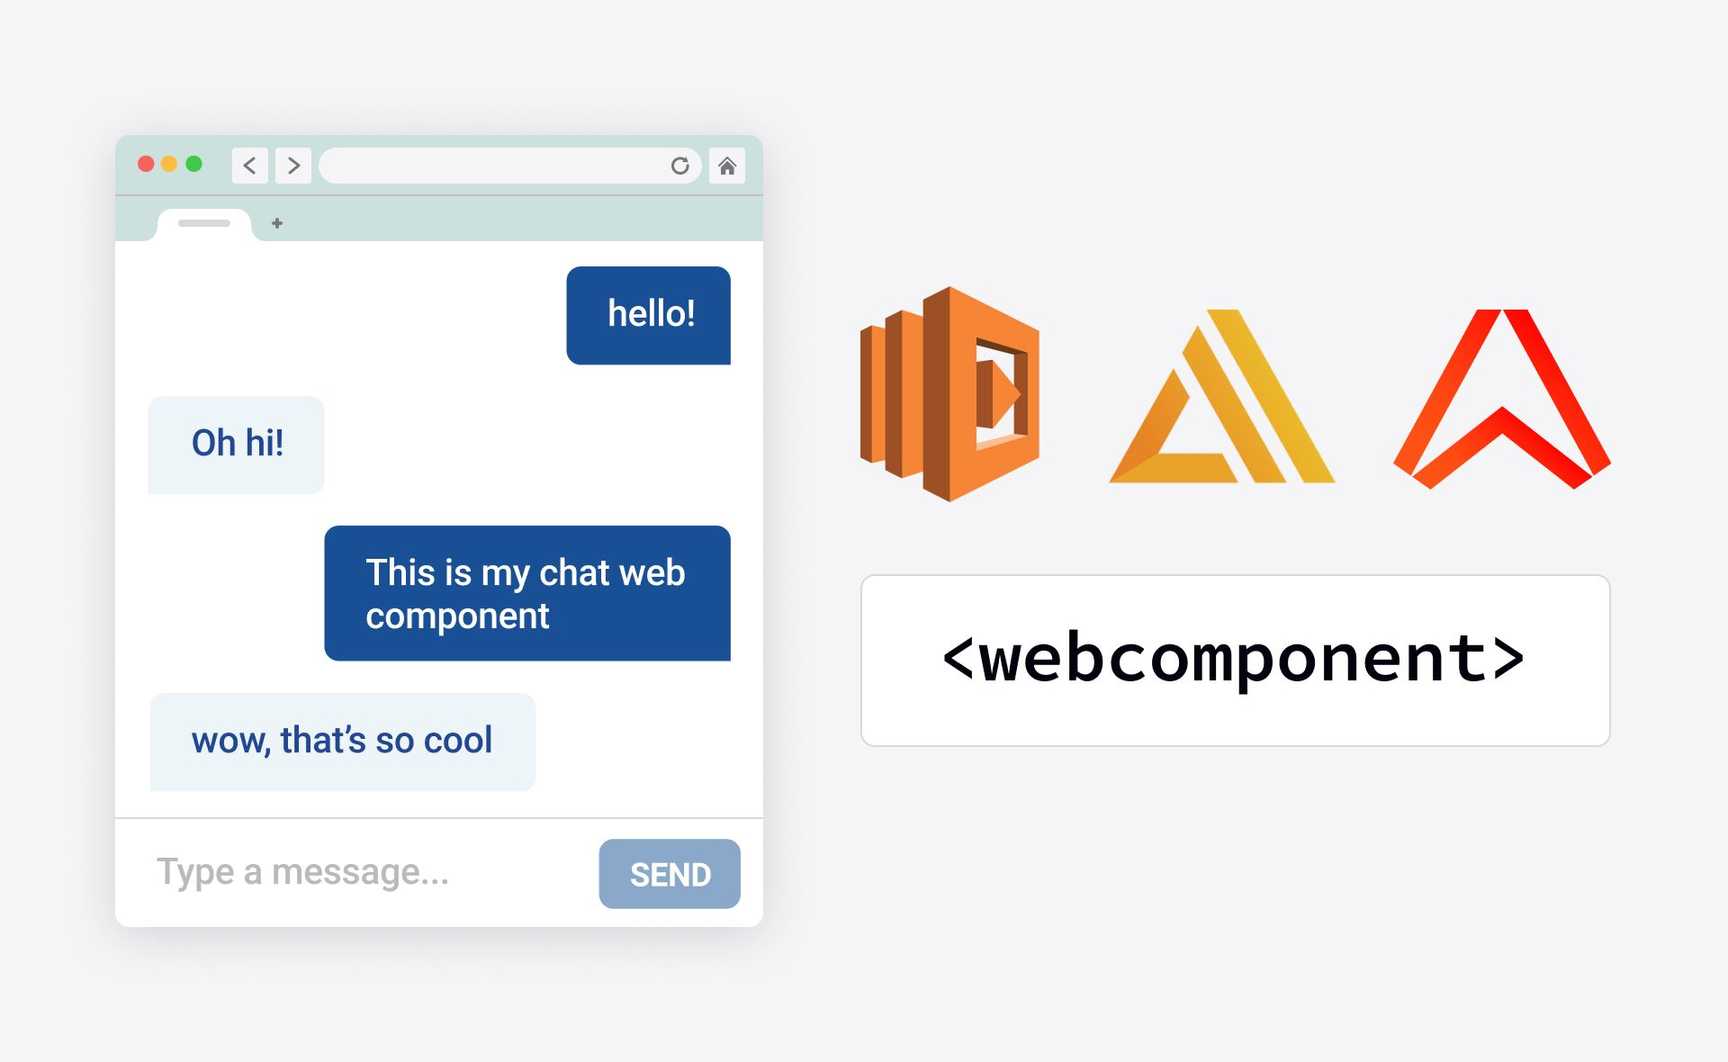 Build your own live chat web component with Ably and AWS